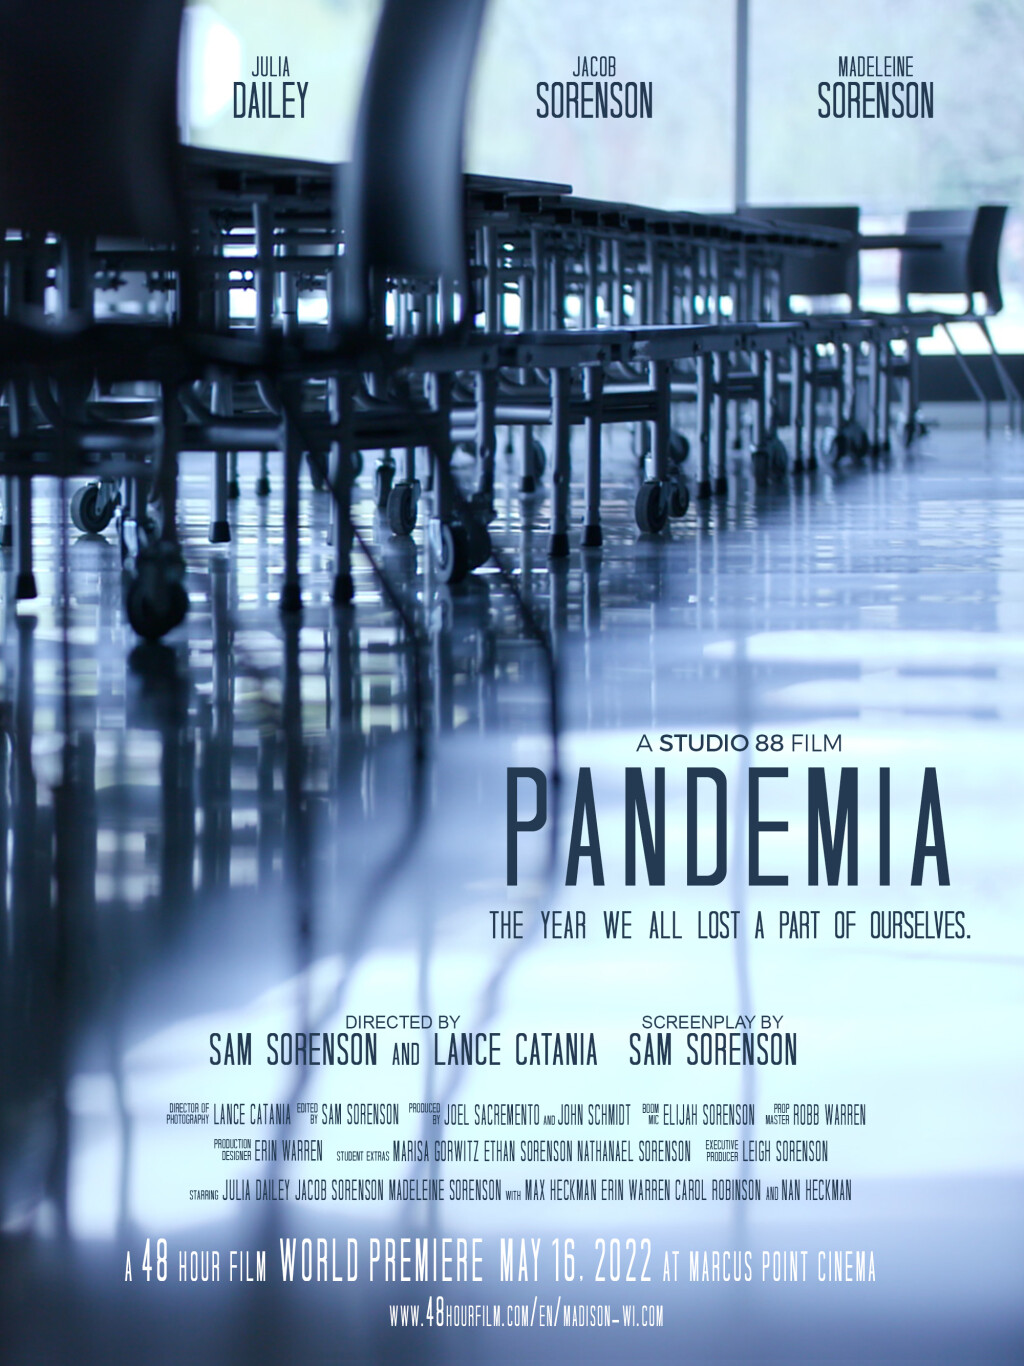 Filmposter for Pandemia